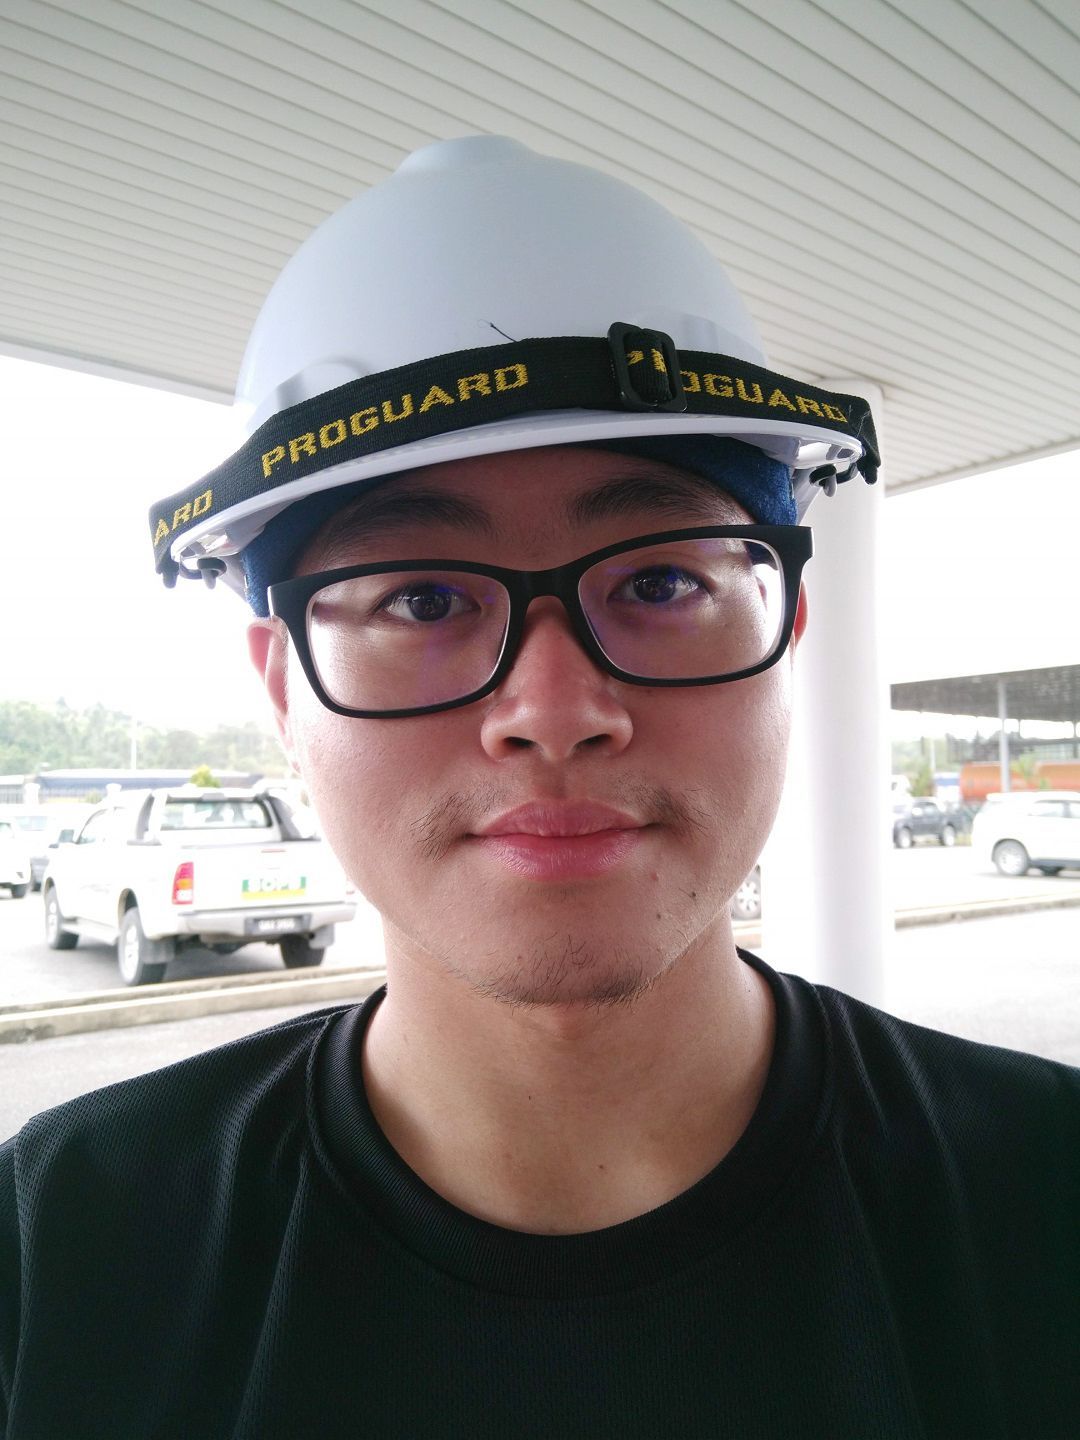 “Curtin Malaysia was not my first choice when I graduated from high school, but somehow I ended up here. I have to say two aspects of Curtin Malaysia have really impressed me. Firstly, it’s the people. Most of the lecturers and administrative staff...